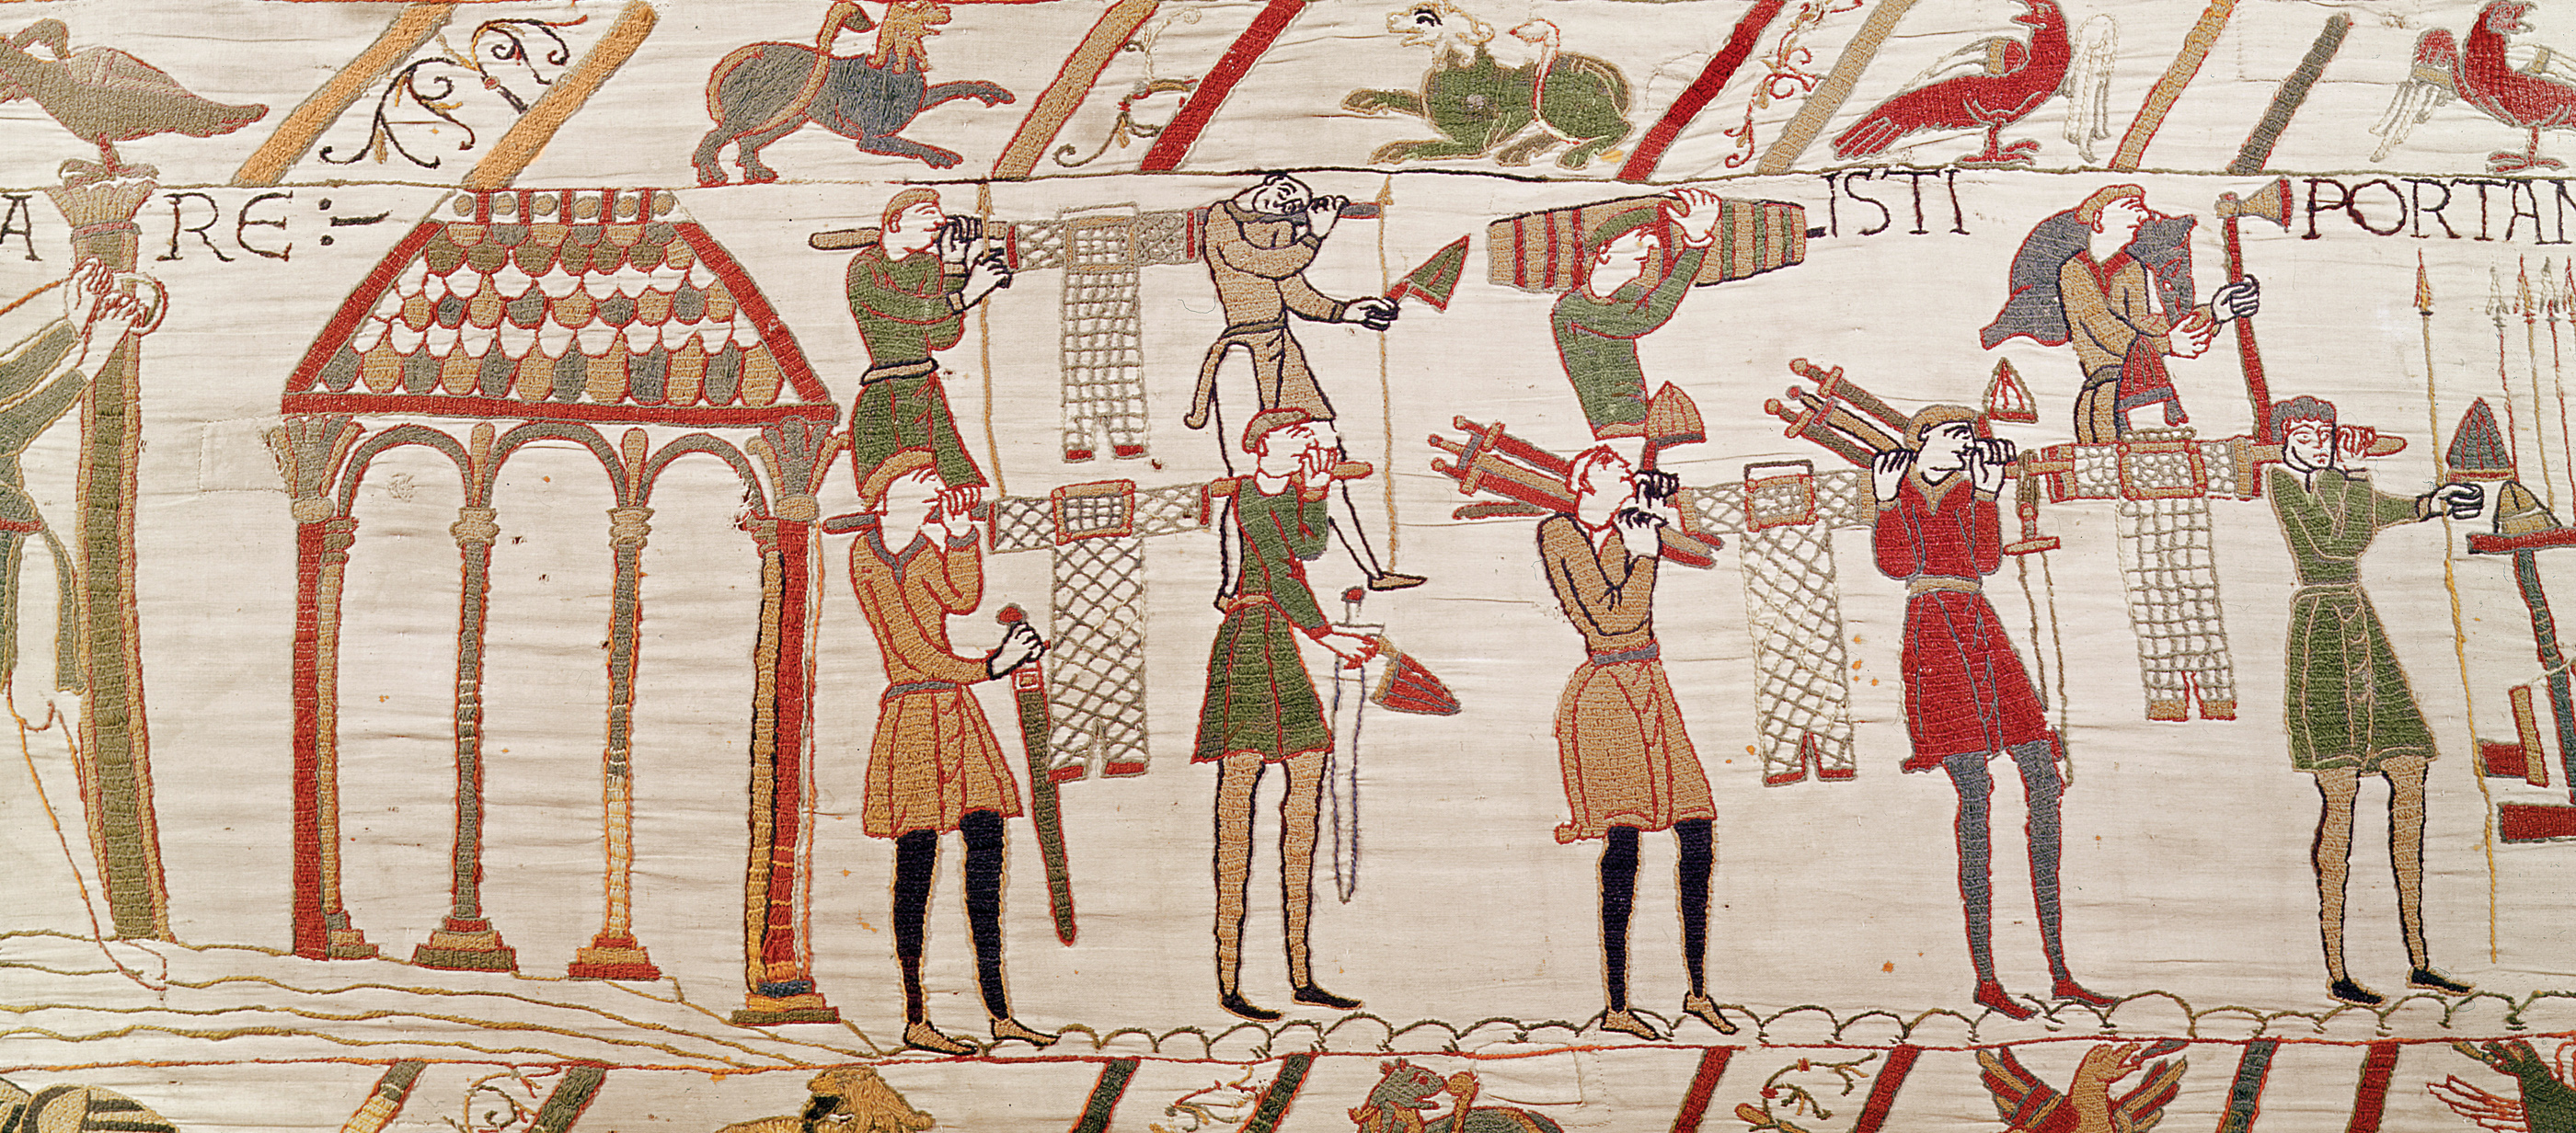 Normans load their boats before crossing the English Channel, 1066. Detail from the Bayeux tapestry, eleventh century. Musée de la Tapisserie de Bayeux, Normandy, France. 